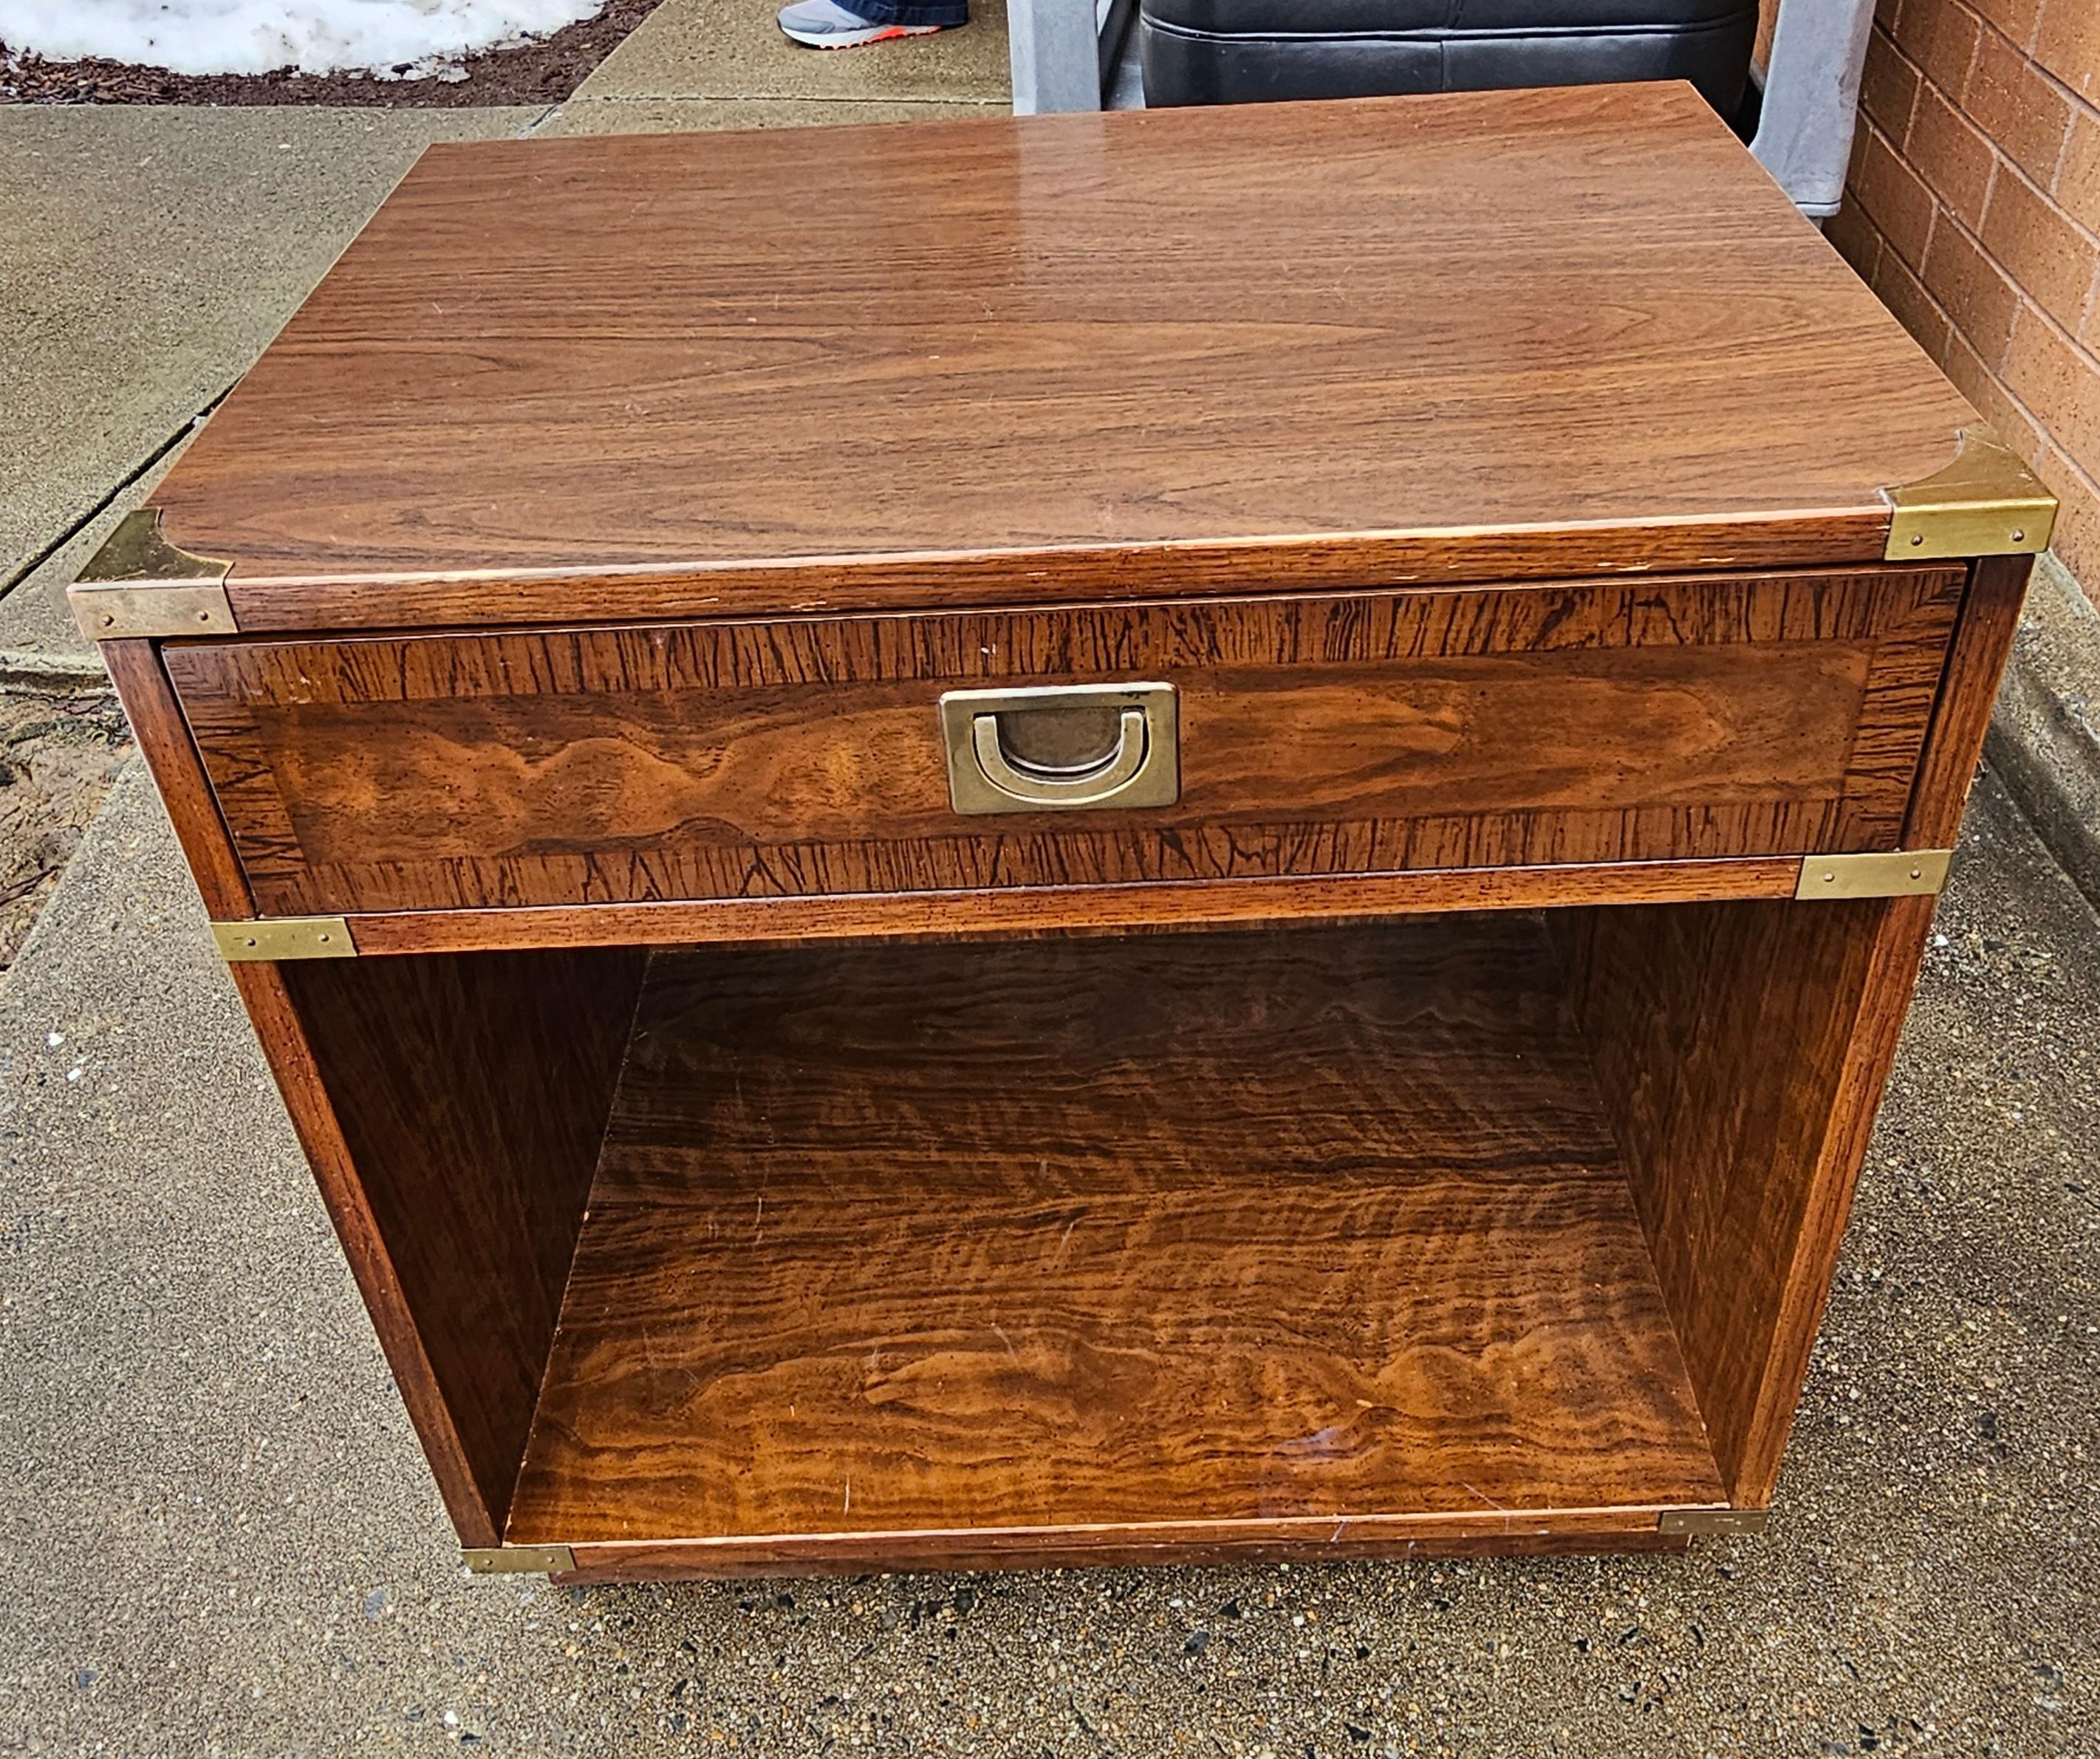 A Mid Century Single drawer two tier campaign bed side Table by Drexel Furniture. Good vintage condition. Measures 23.5